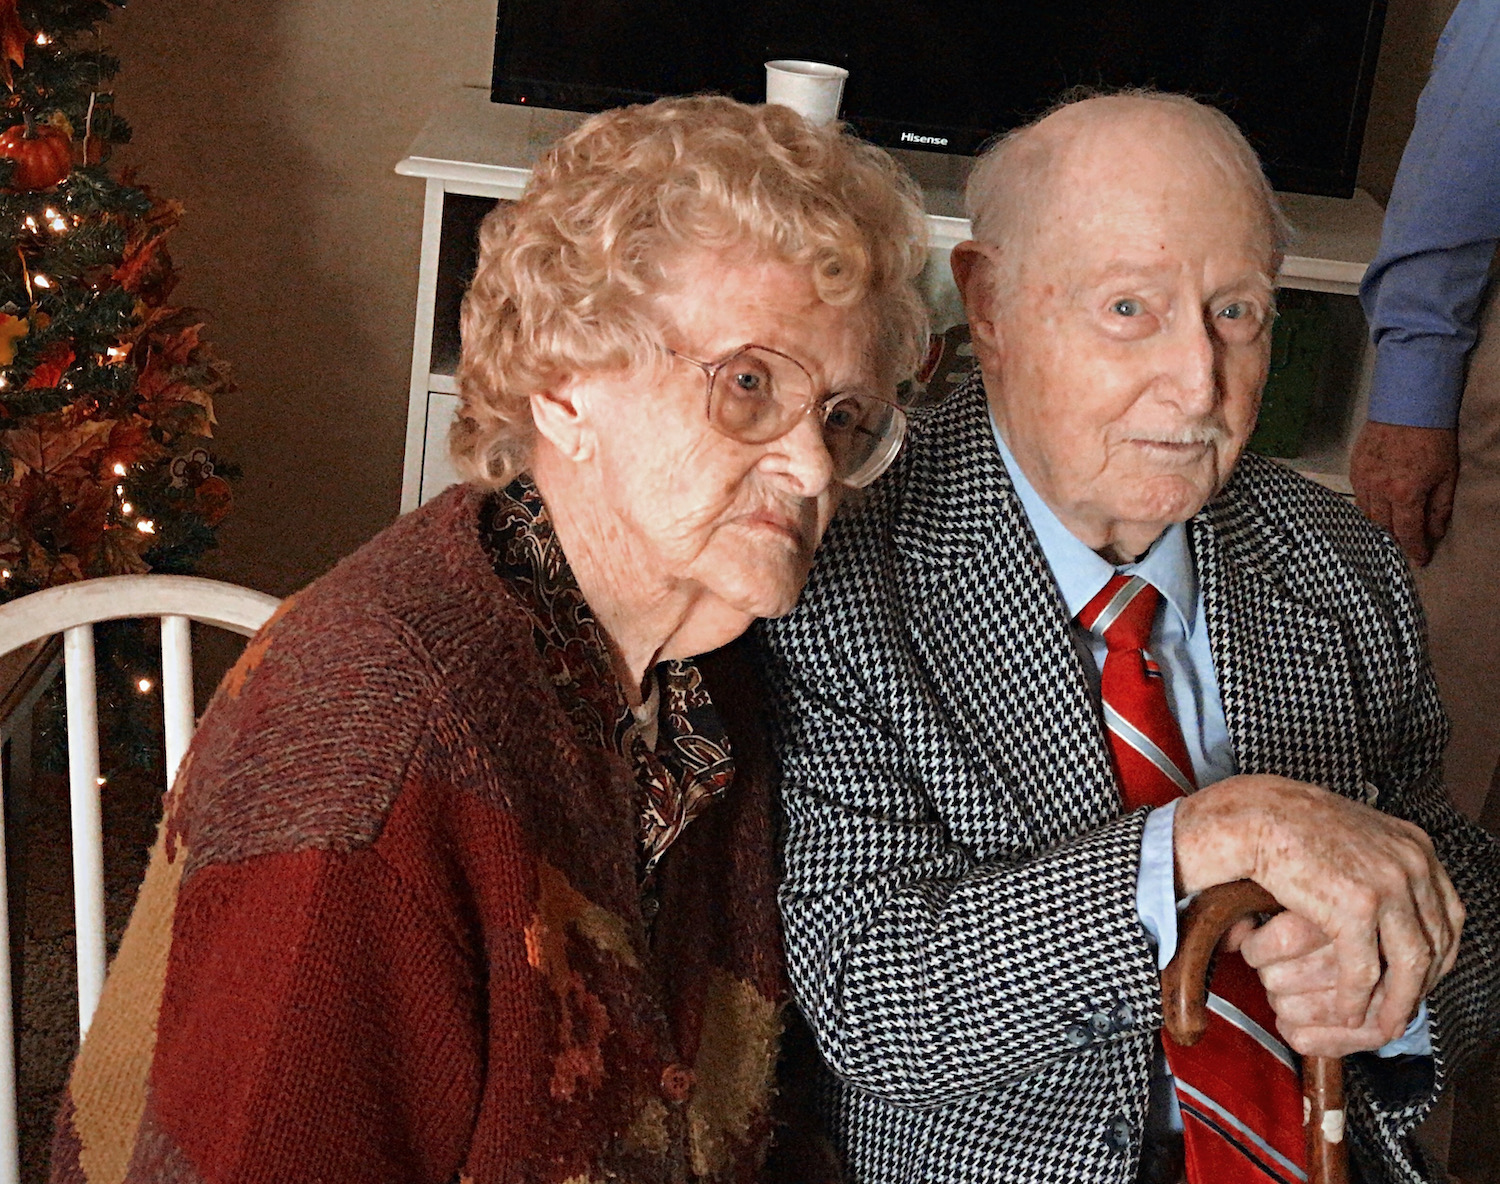 Hannah Tom Schoolfield (left) with her husband of 70 years, James